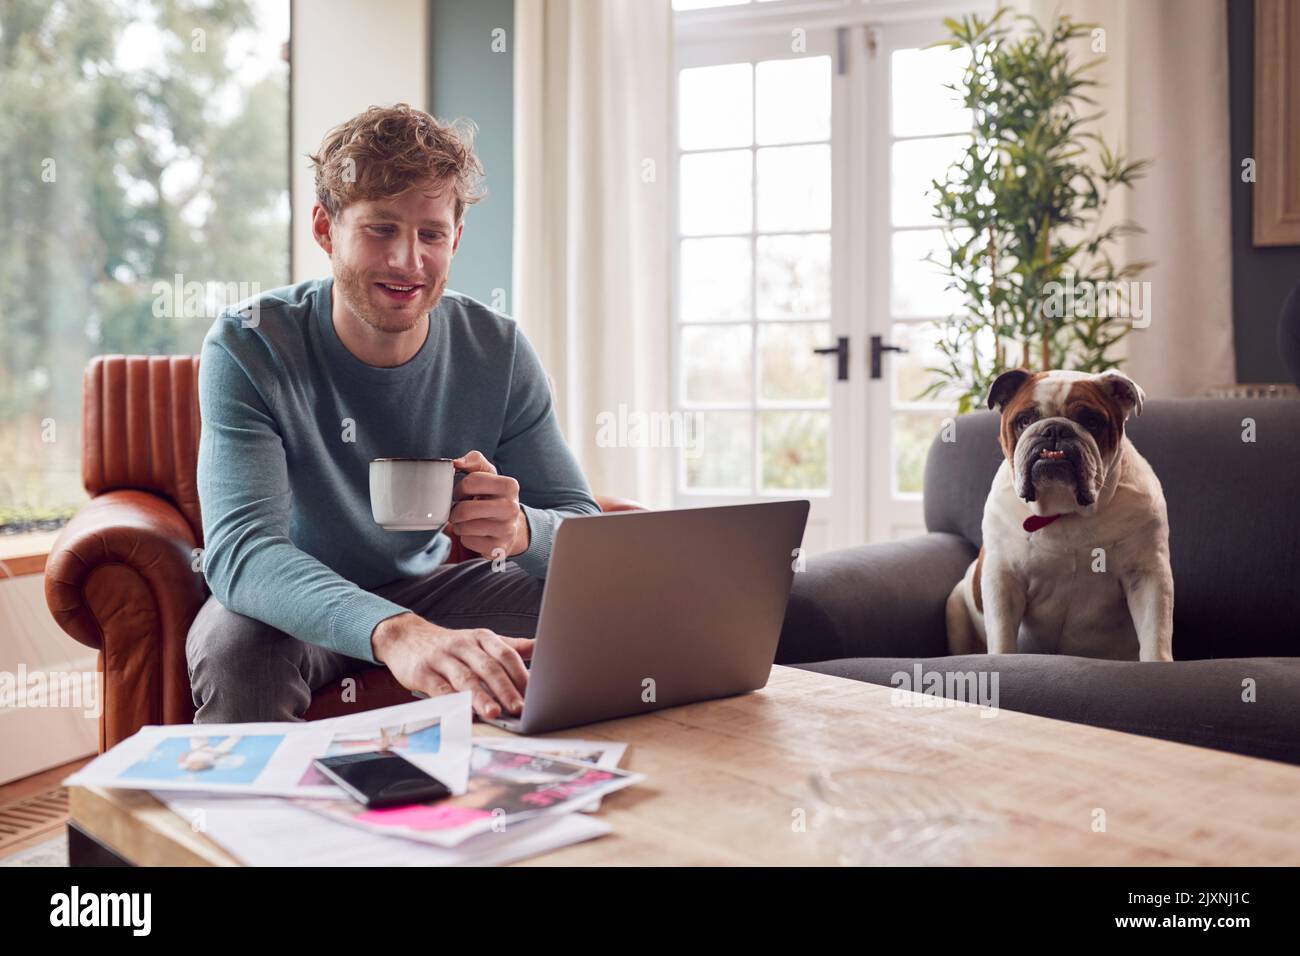 Man Working From Home In Creative Design Or Marketing Industry Checking Artwork With Pet Bulldog Stock Photo